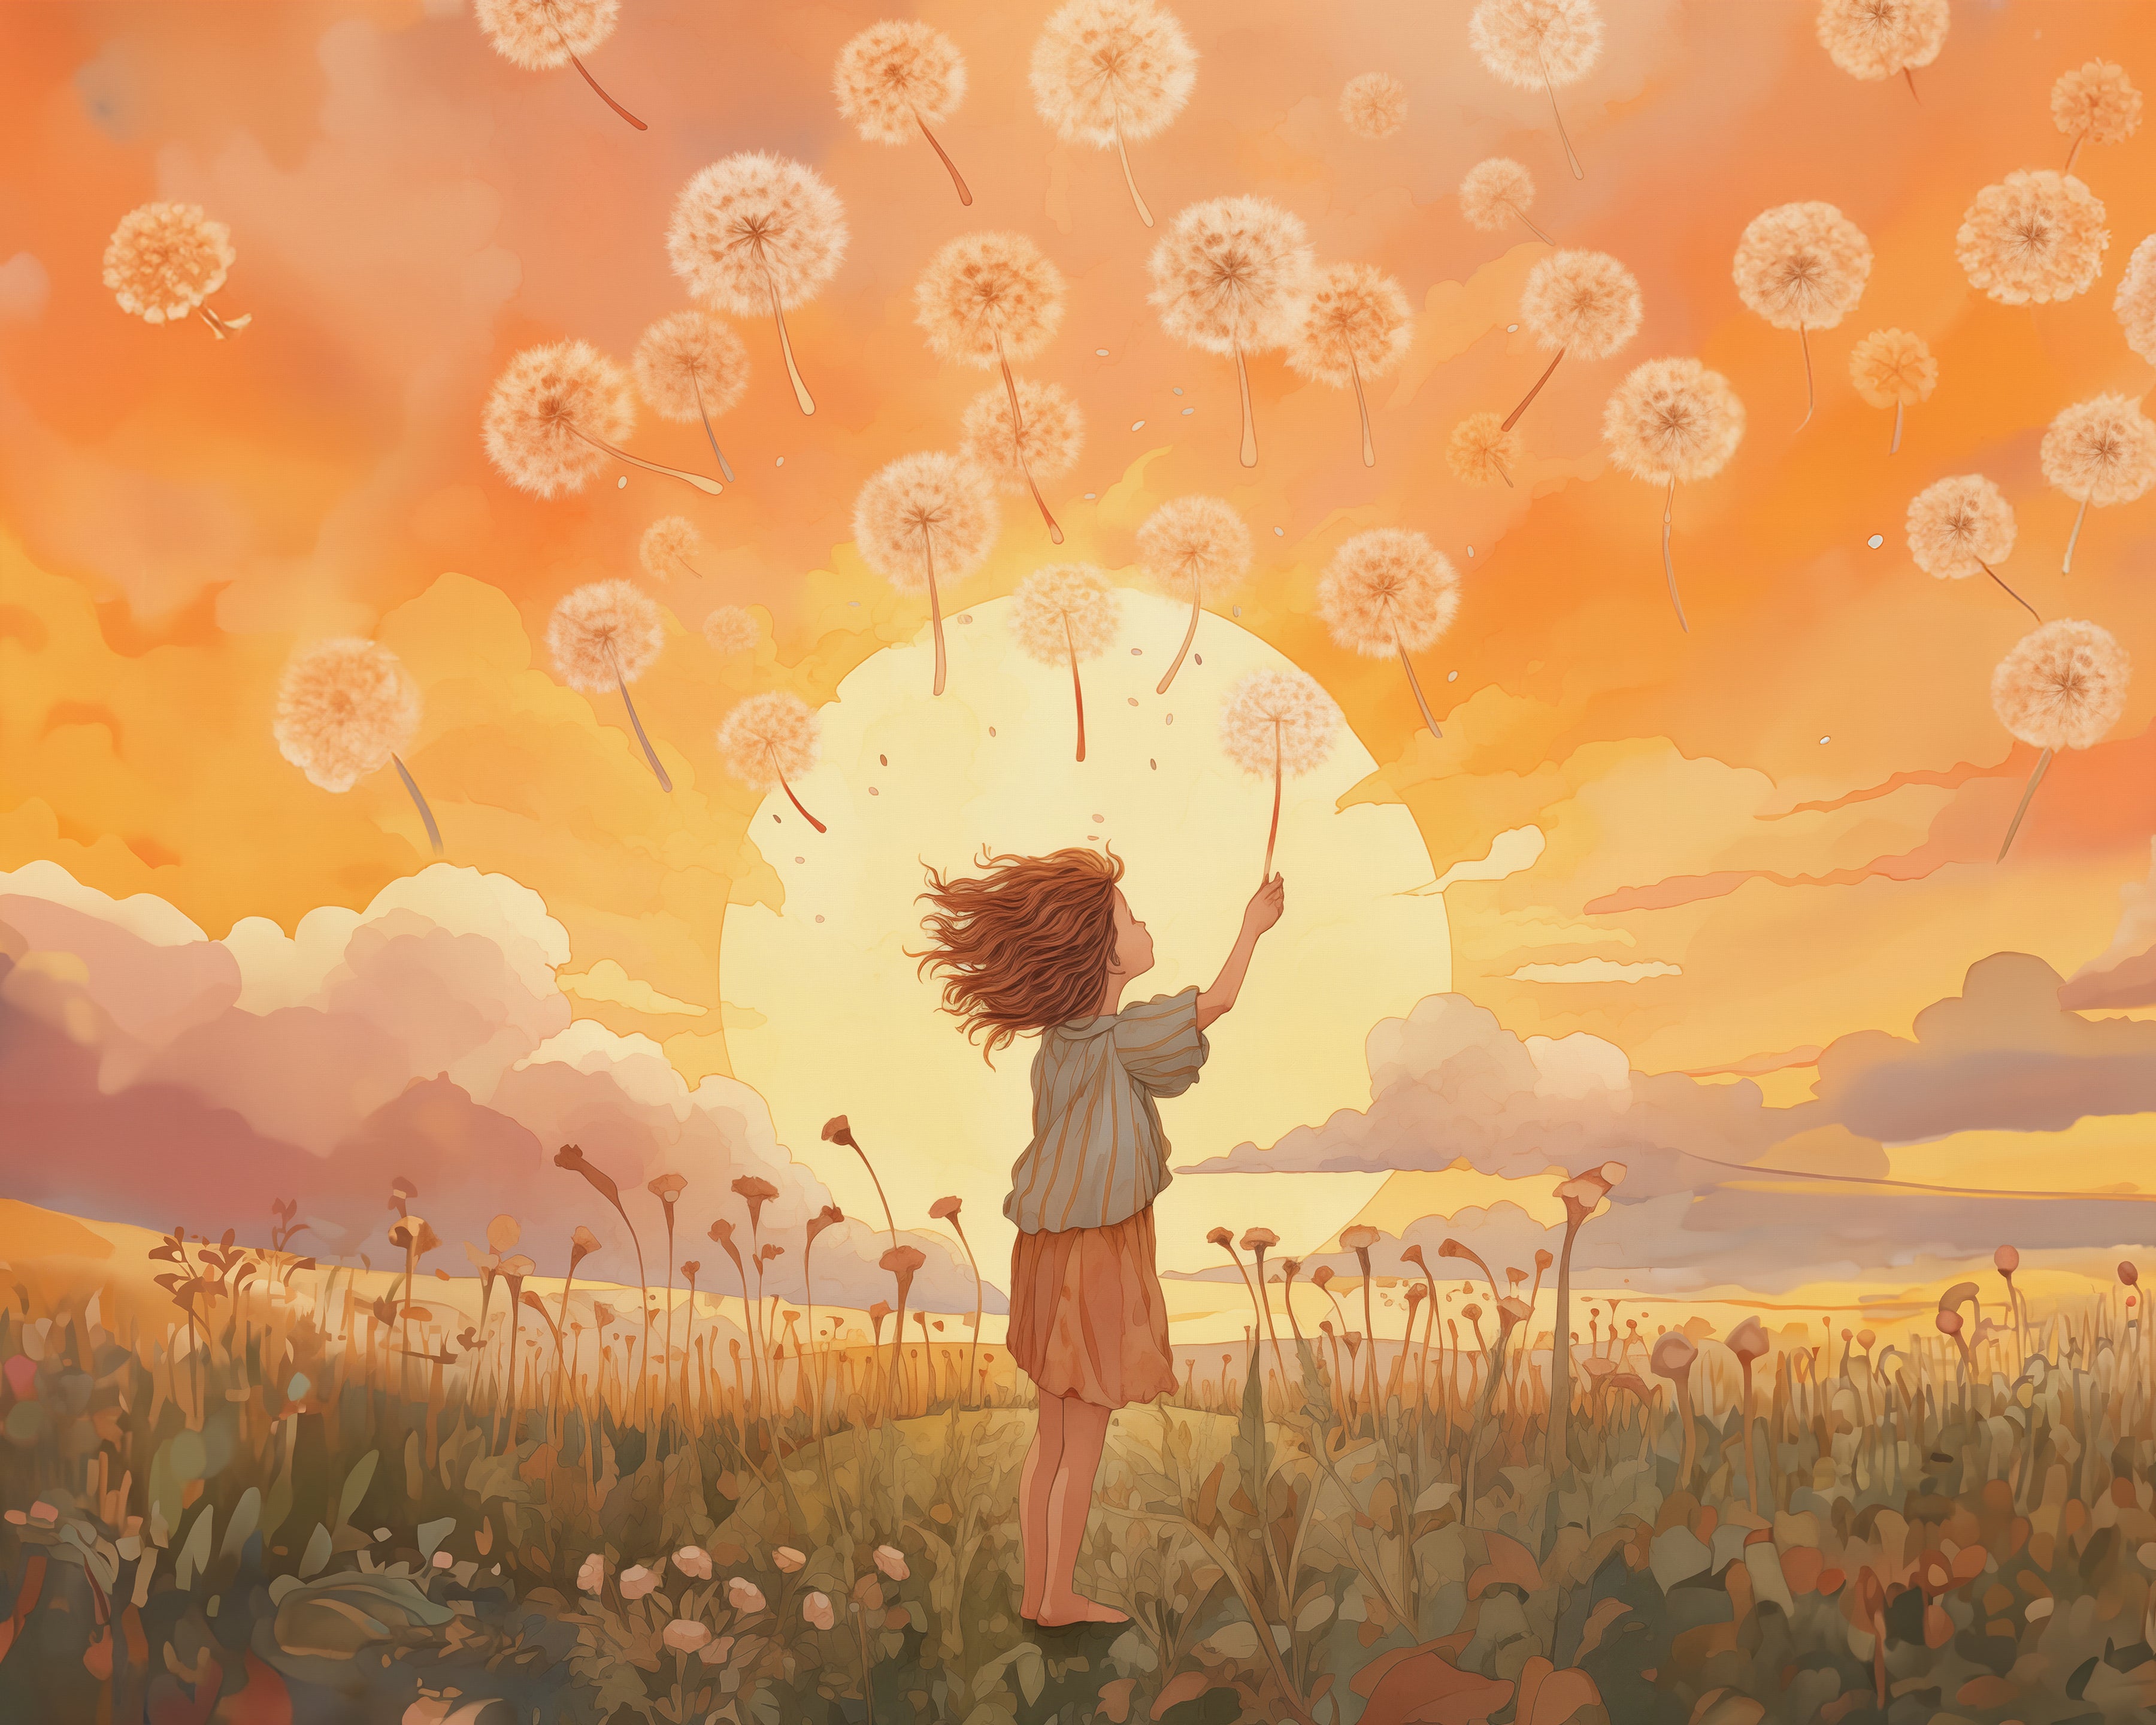 "Children's play area decorated with 'Make a Wish Mural' wallpaper, showcasing a girl making a wish among dandelions."